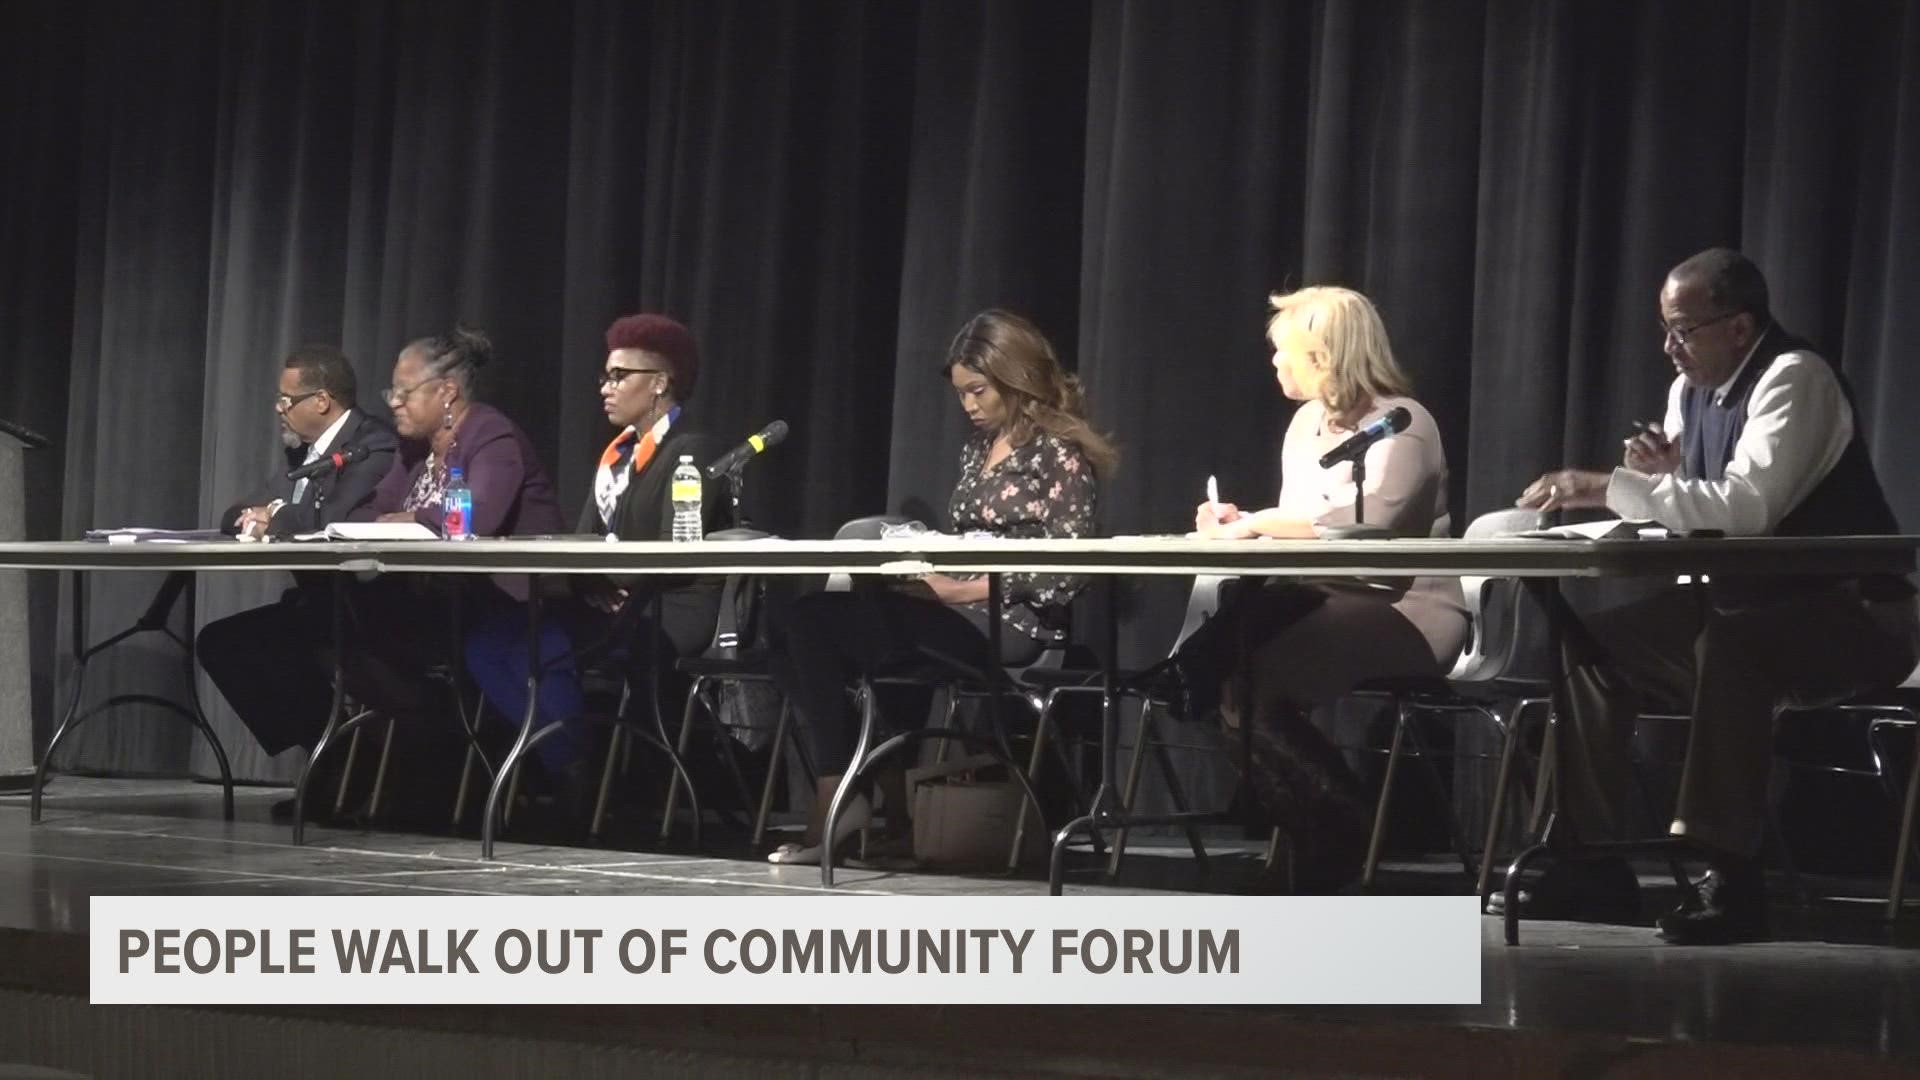 City leaders invited the community out to a forum to take questions and offer mental health resources following the video release of Patrick Lyoya's death.